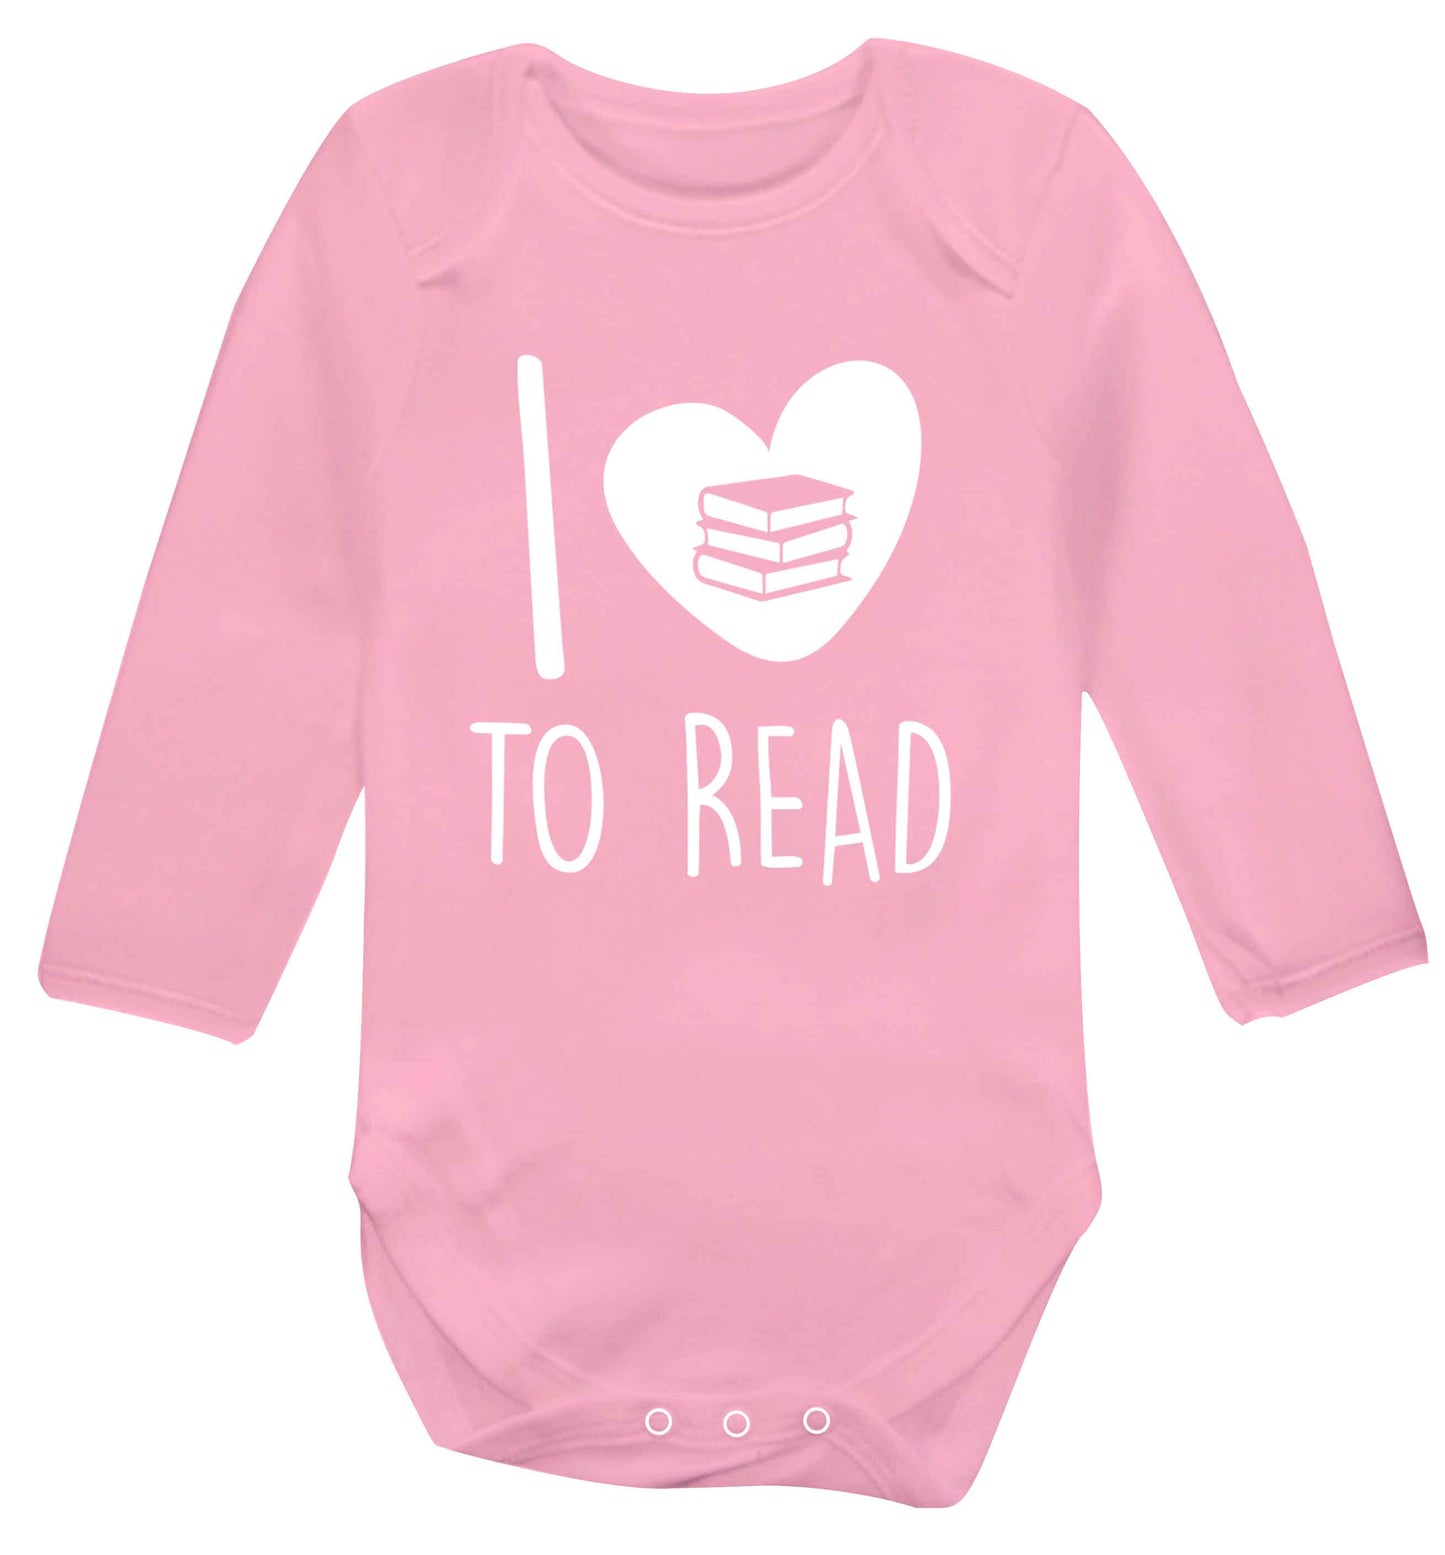 I love to read Baby Vest long sleeved pale pink 6-12 months